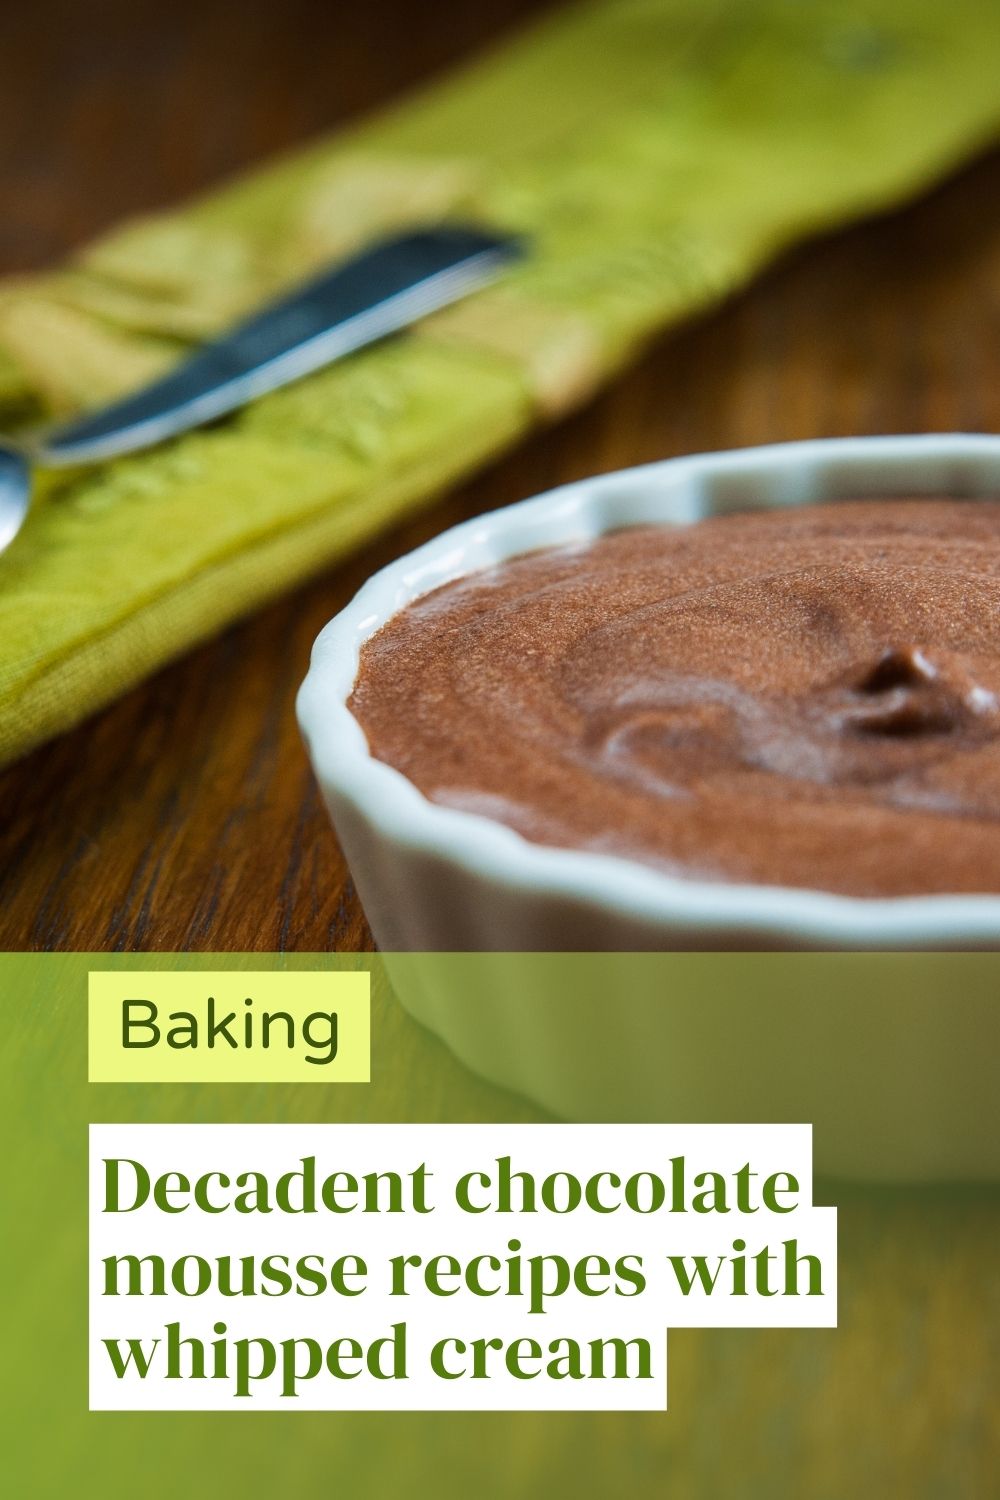 Decadent chocolate mousse recipes with whipped cream